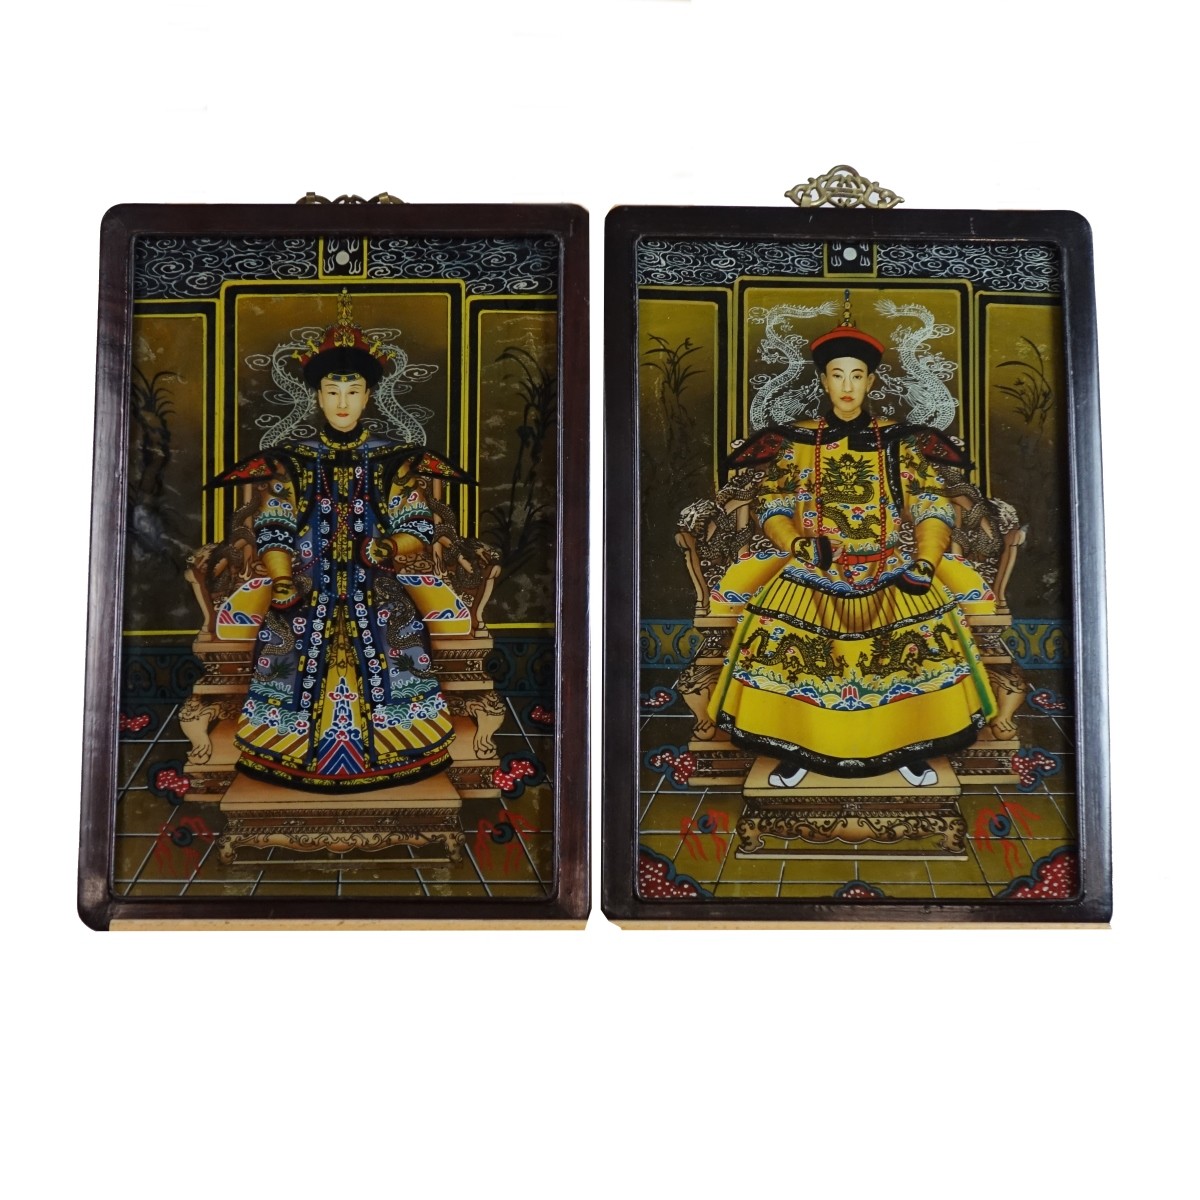 Pair of Chinese Reverse Painted Glass Panels